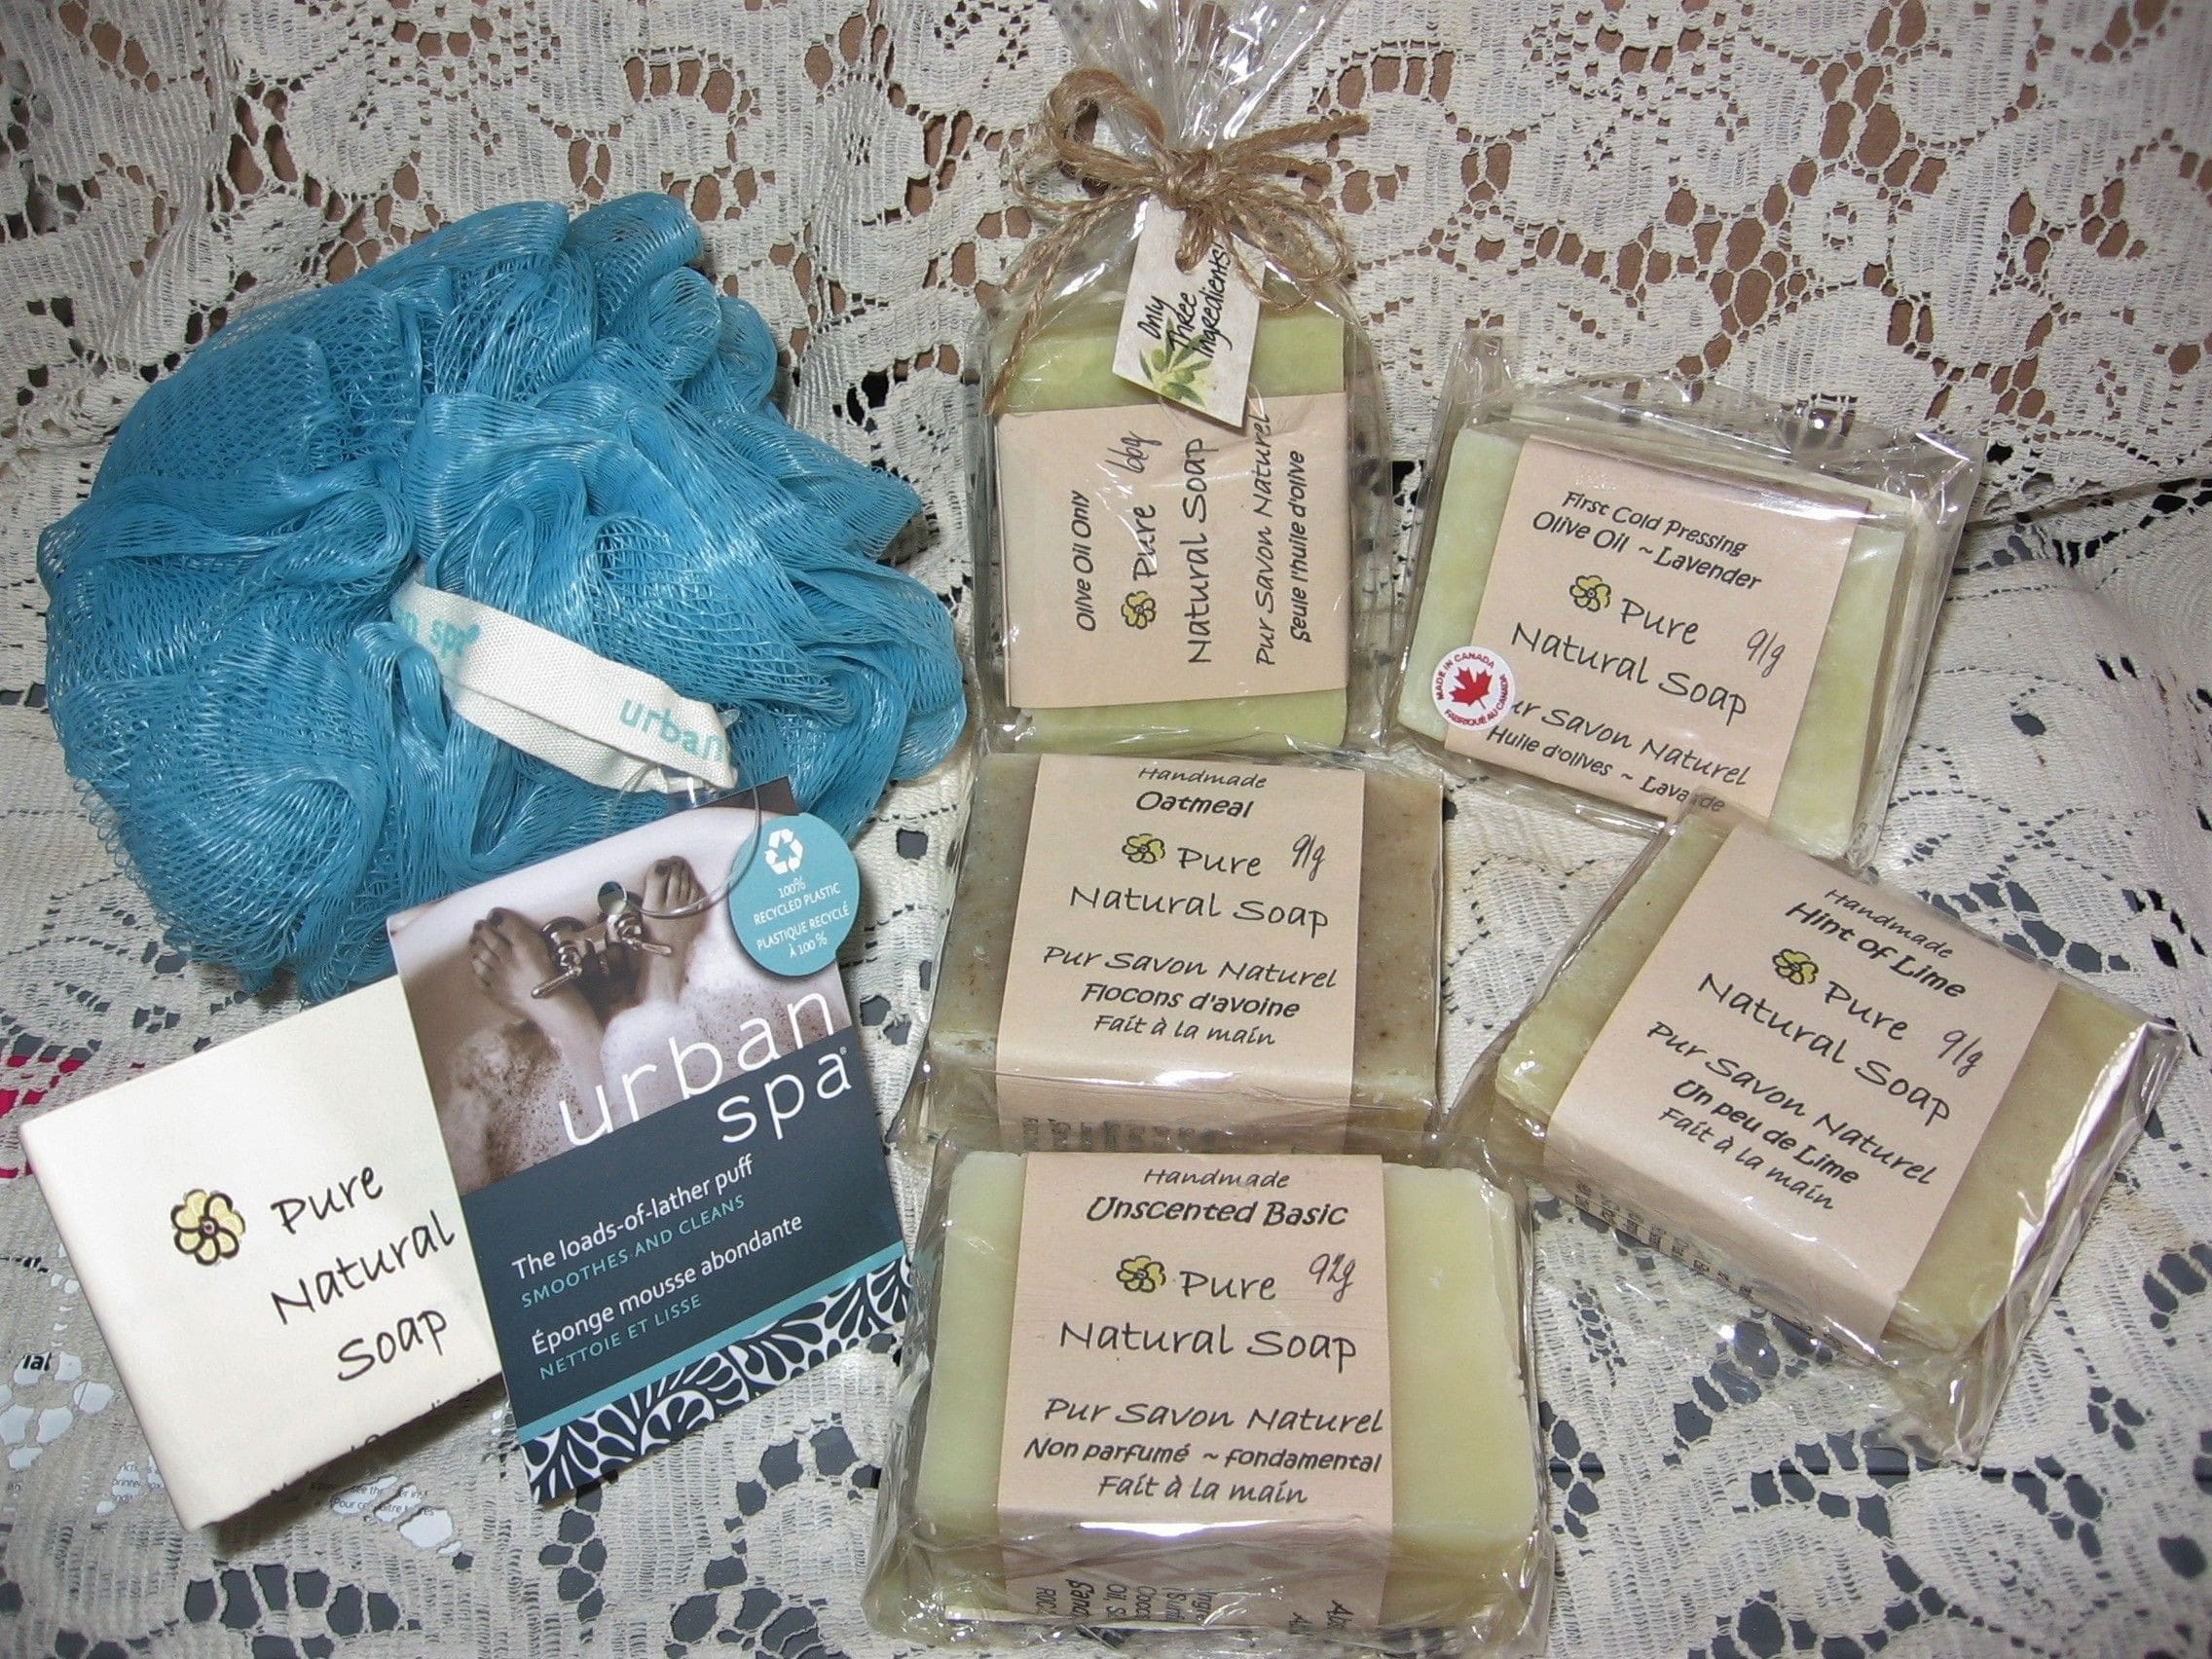 Pure Natural Soap Gifts handmade with care in Manitoba, Canada from wholesome ingredients and no chemical additives.  Inexpensive and attractive.